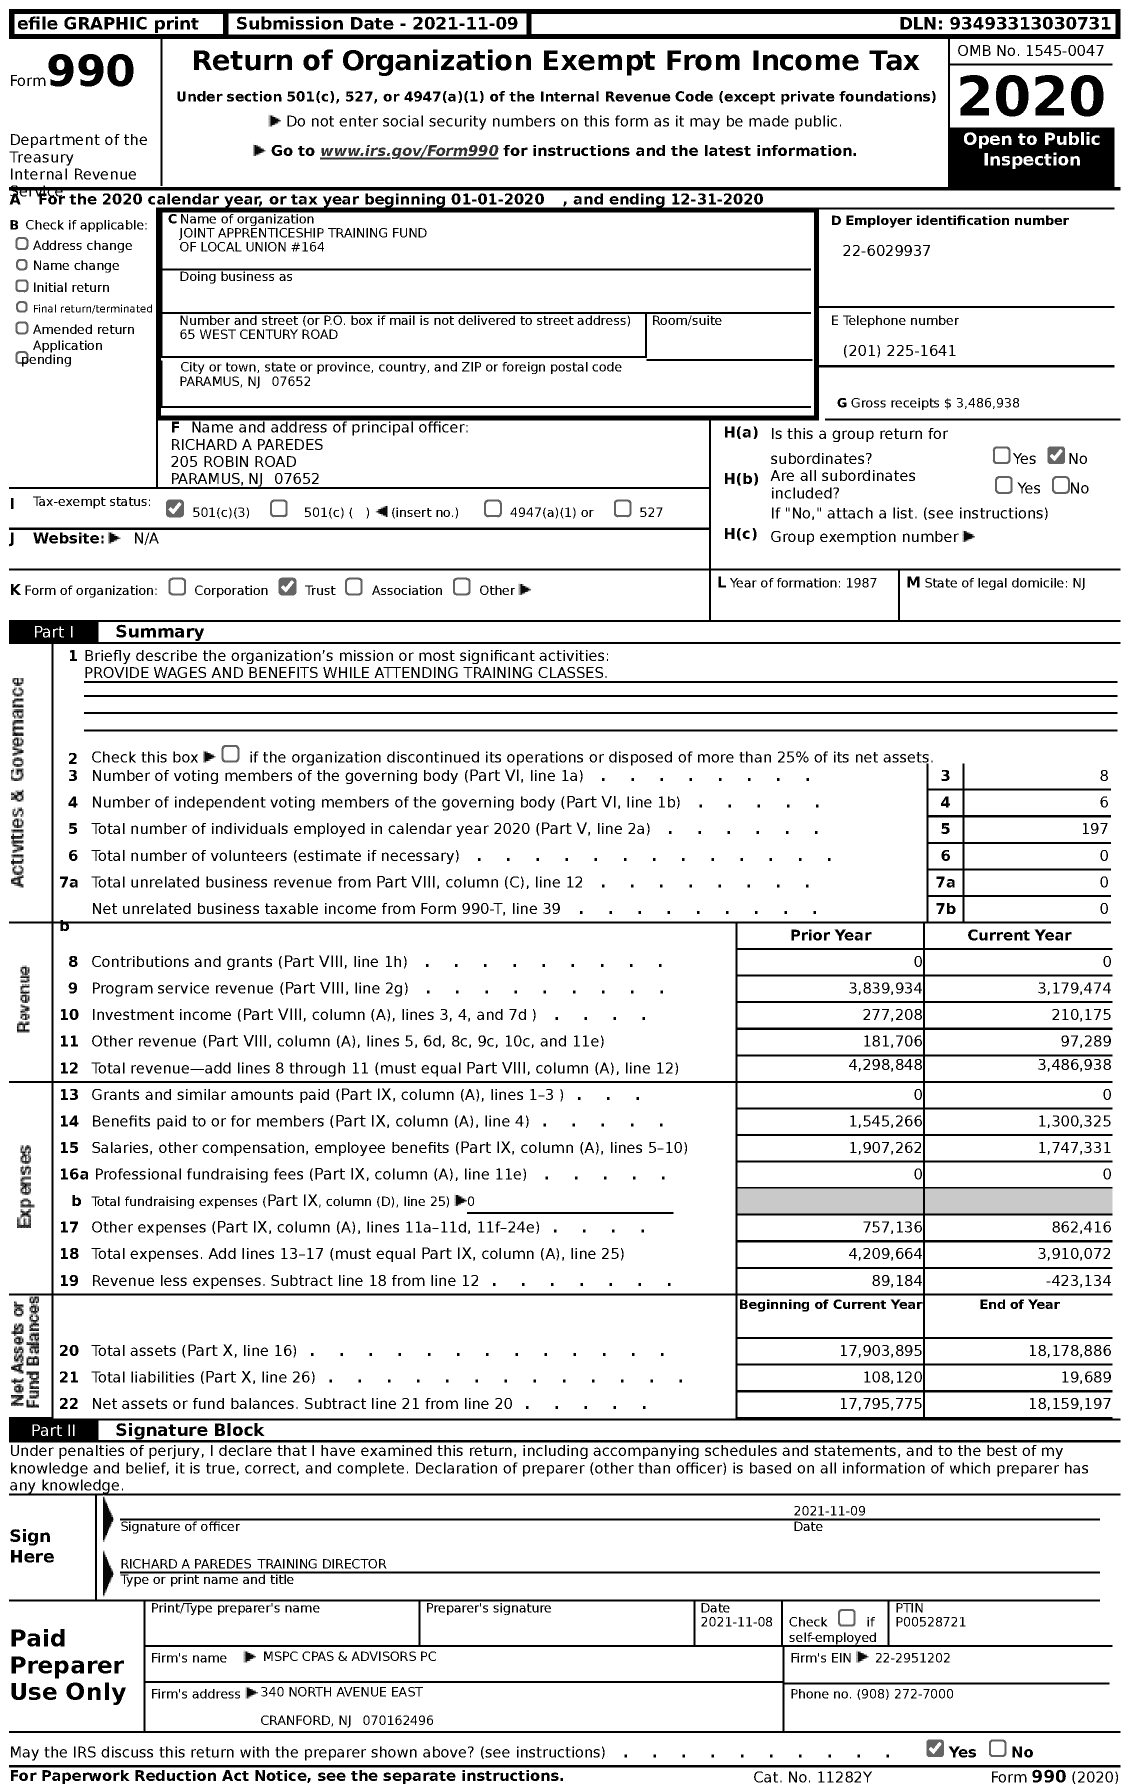 Image of first page of 2020 Form 990 for Joint Apprenticeship Training Fund of Local Union #164